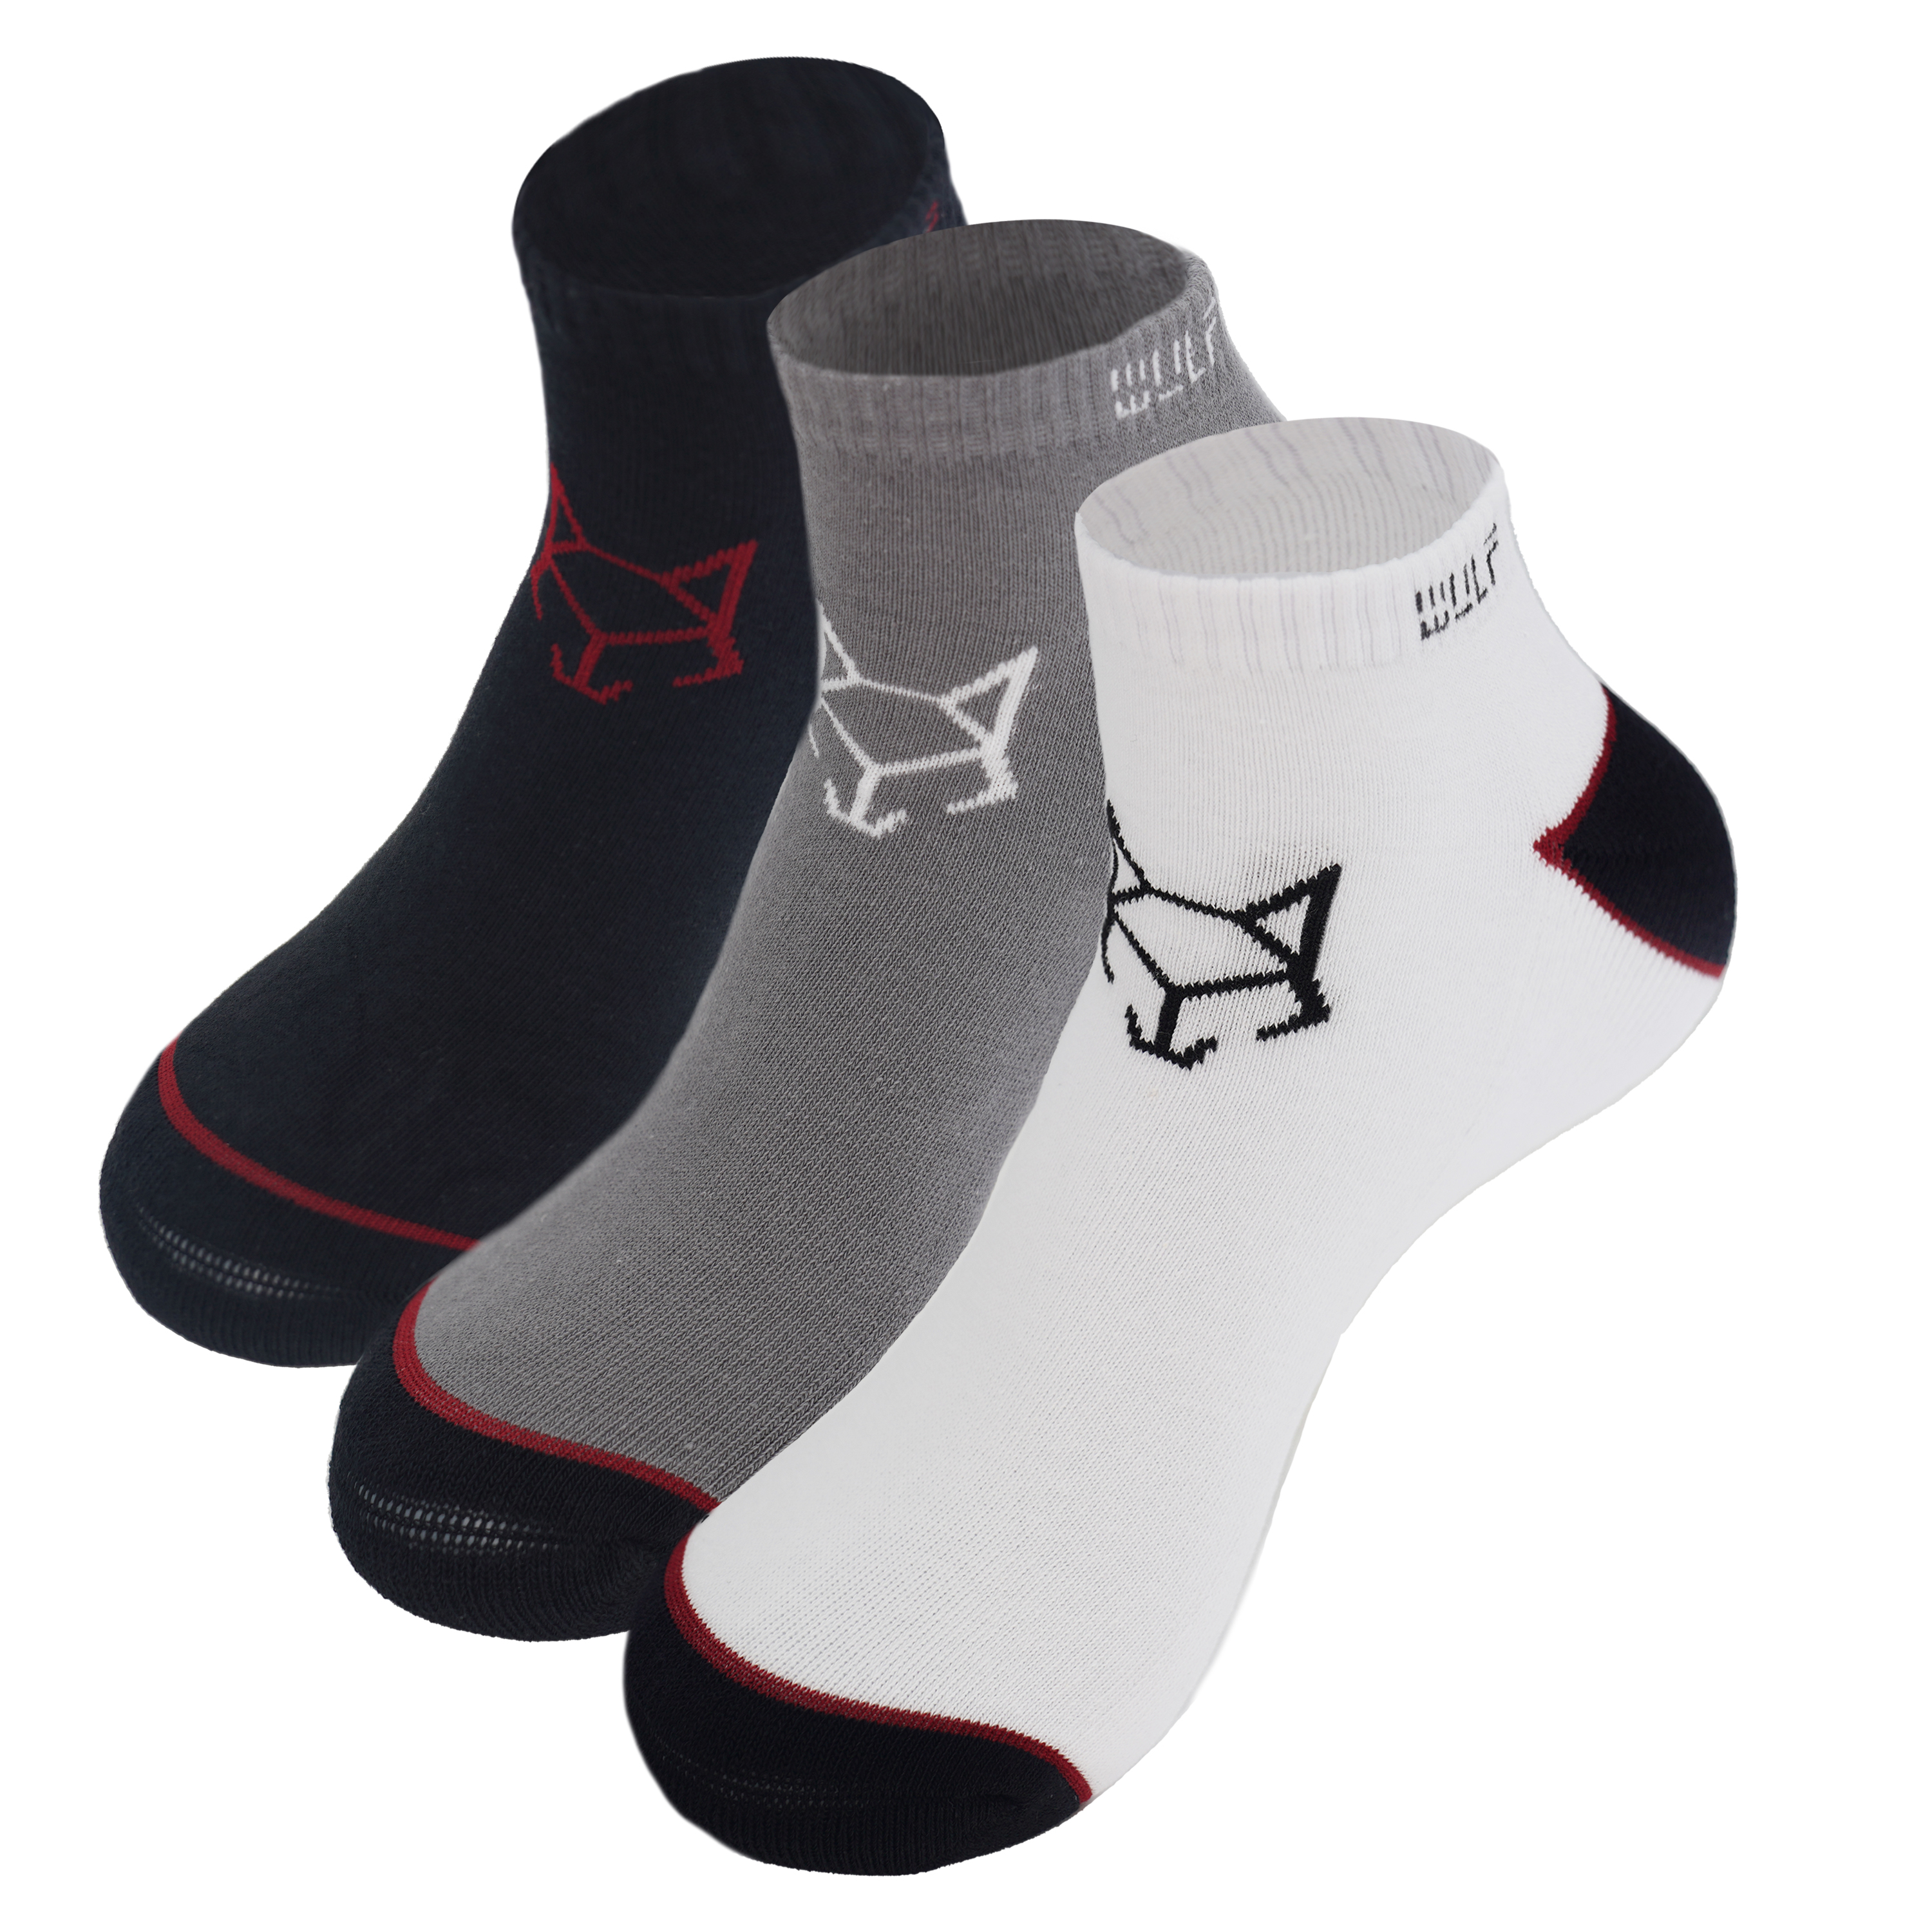 Classic Men's Ankle Socks - Multi Color WULF pack of 3